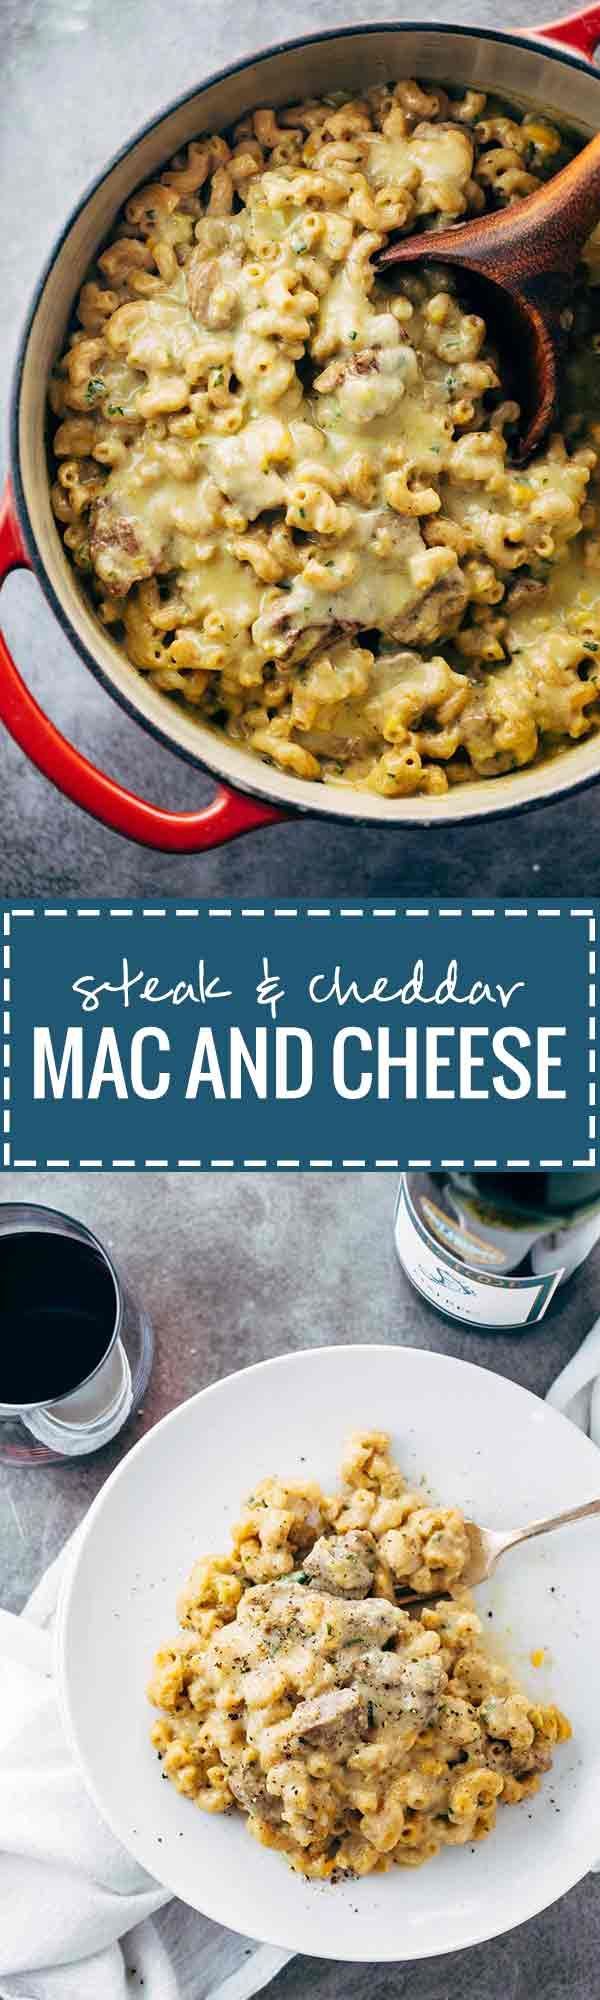 What meat goes with mac and cheese for dinner free